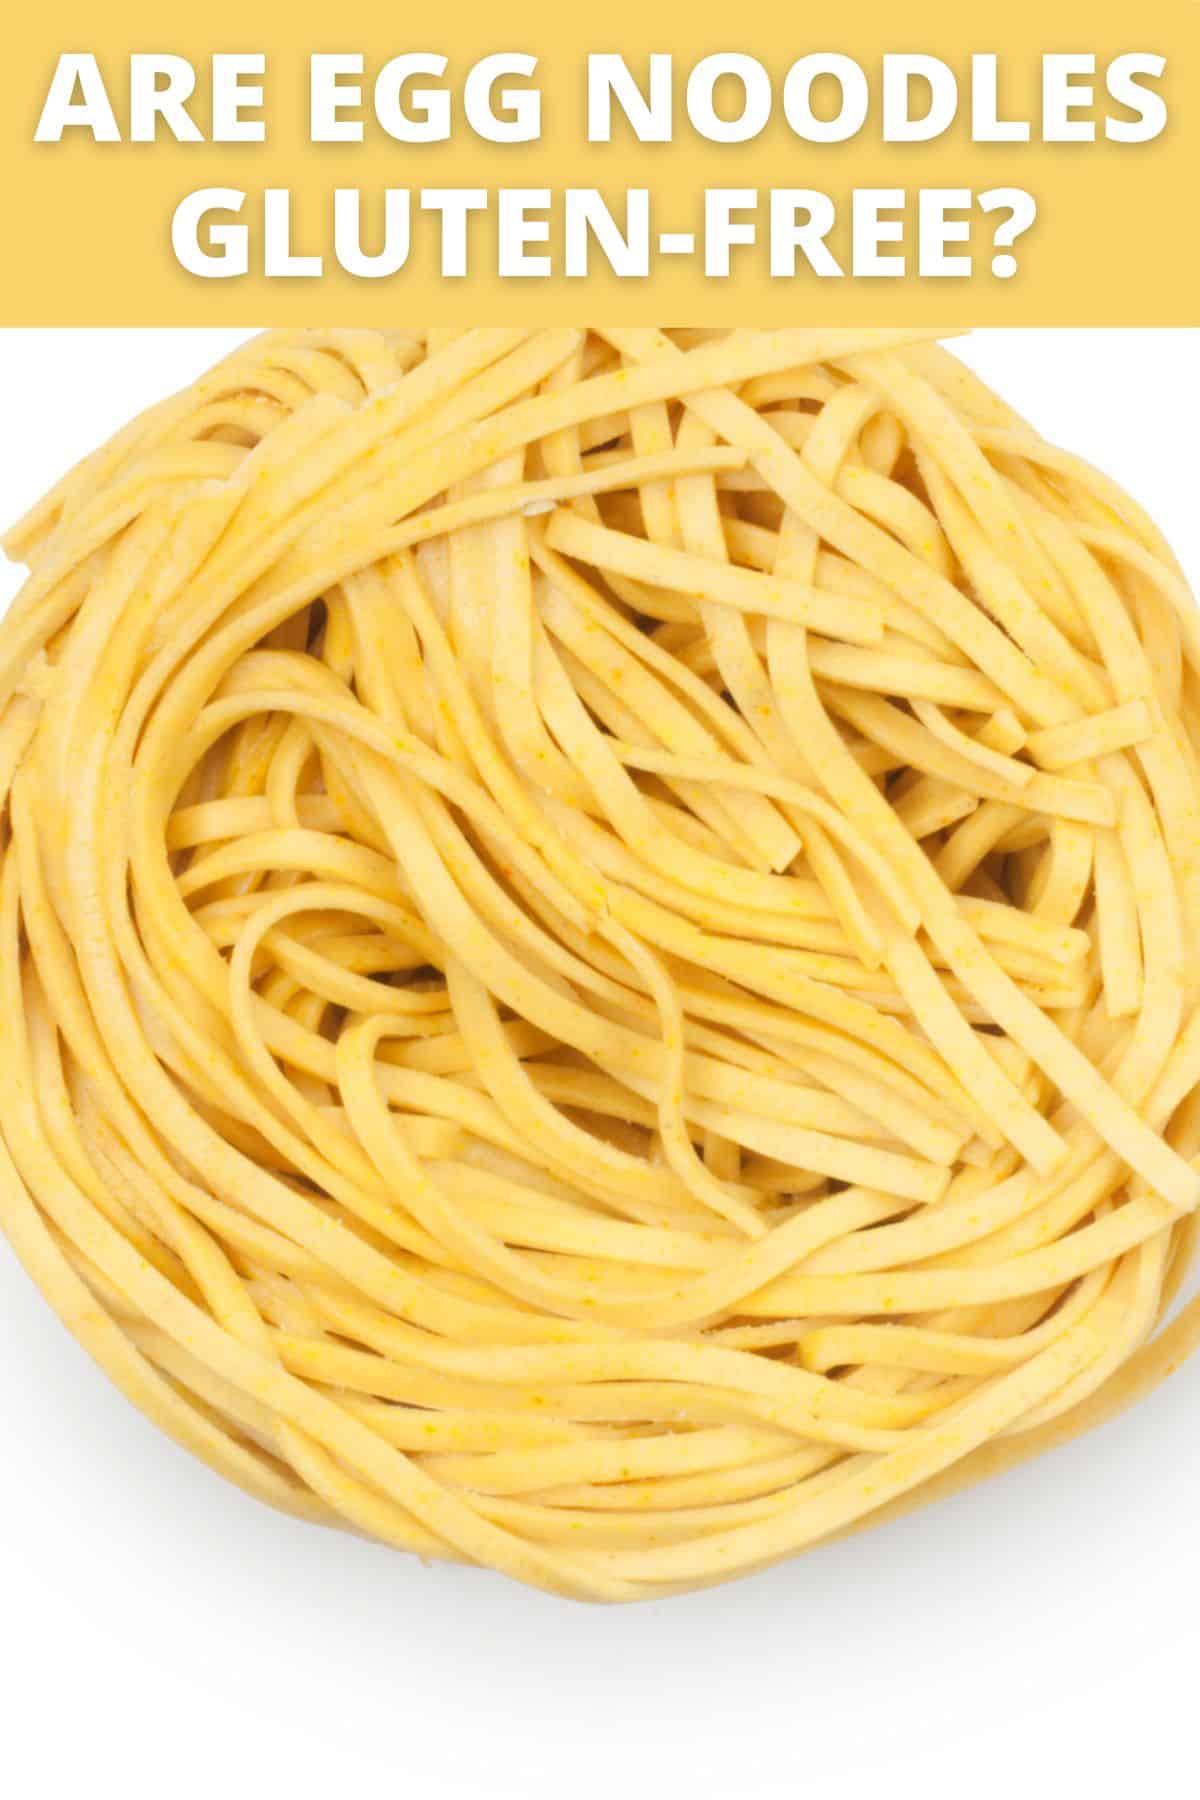 close up image of egg noodles with text overlay that says "are egg noodles gluten-free"